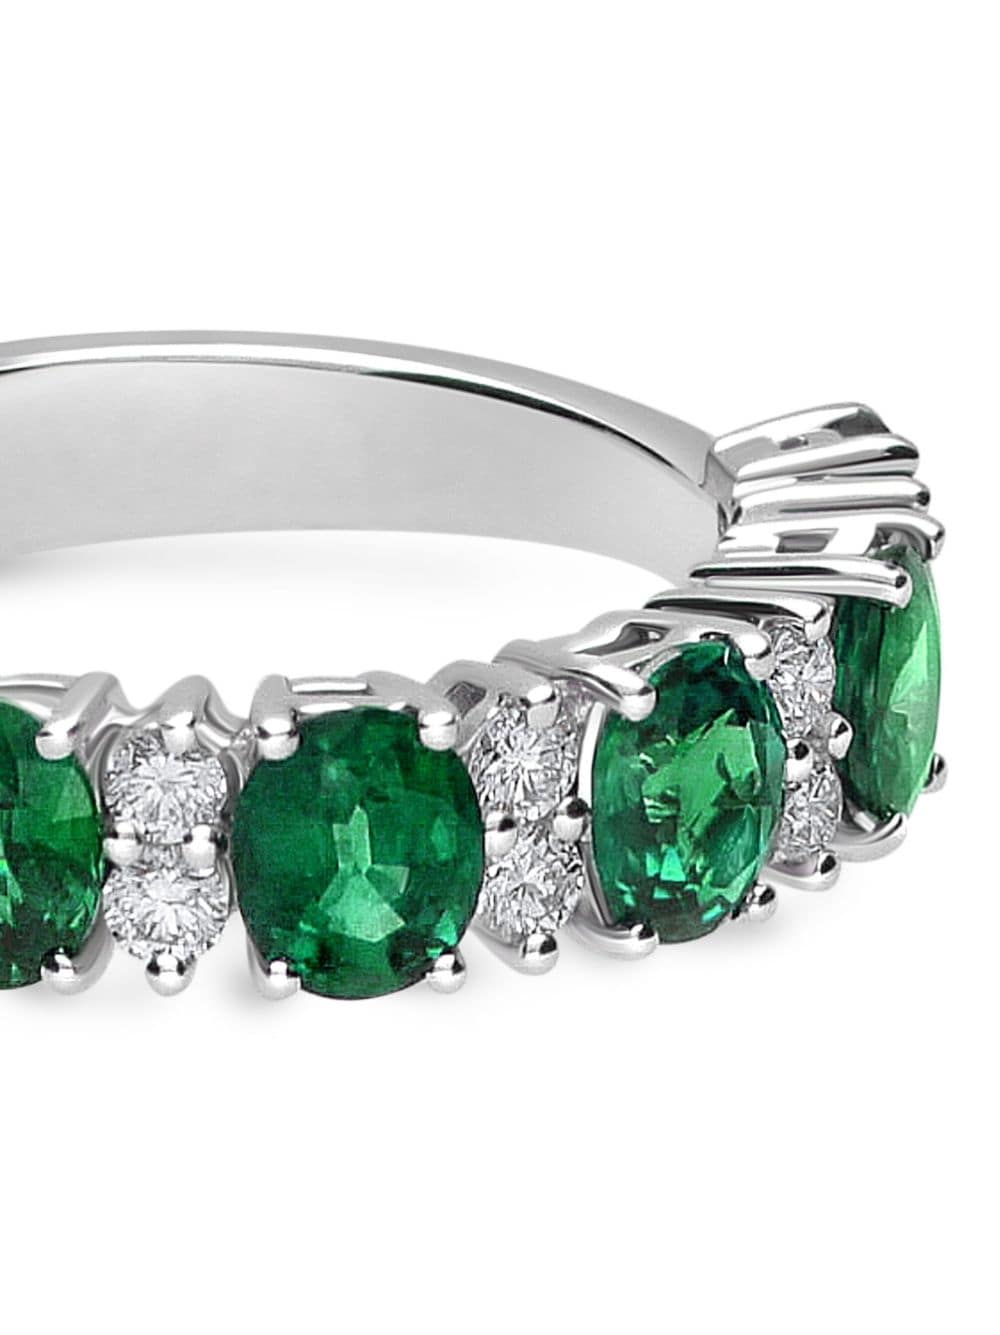 Shop Leo Pizzo 18kt White Gold Diamond Emerald Eternity Band Ring In Silver